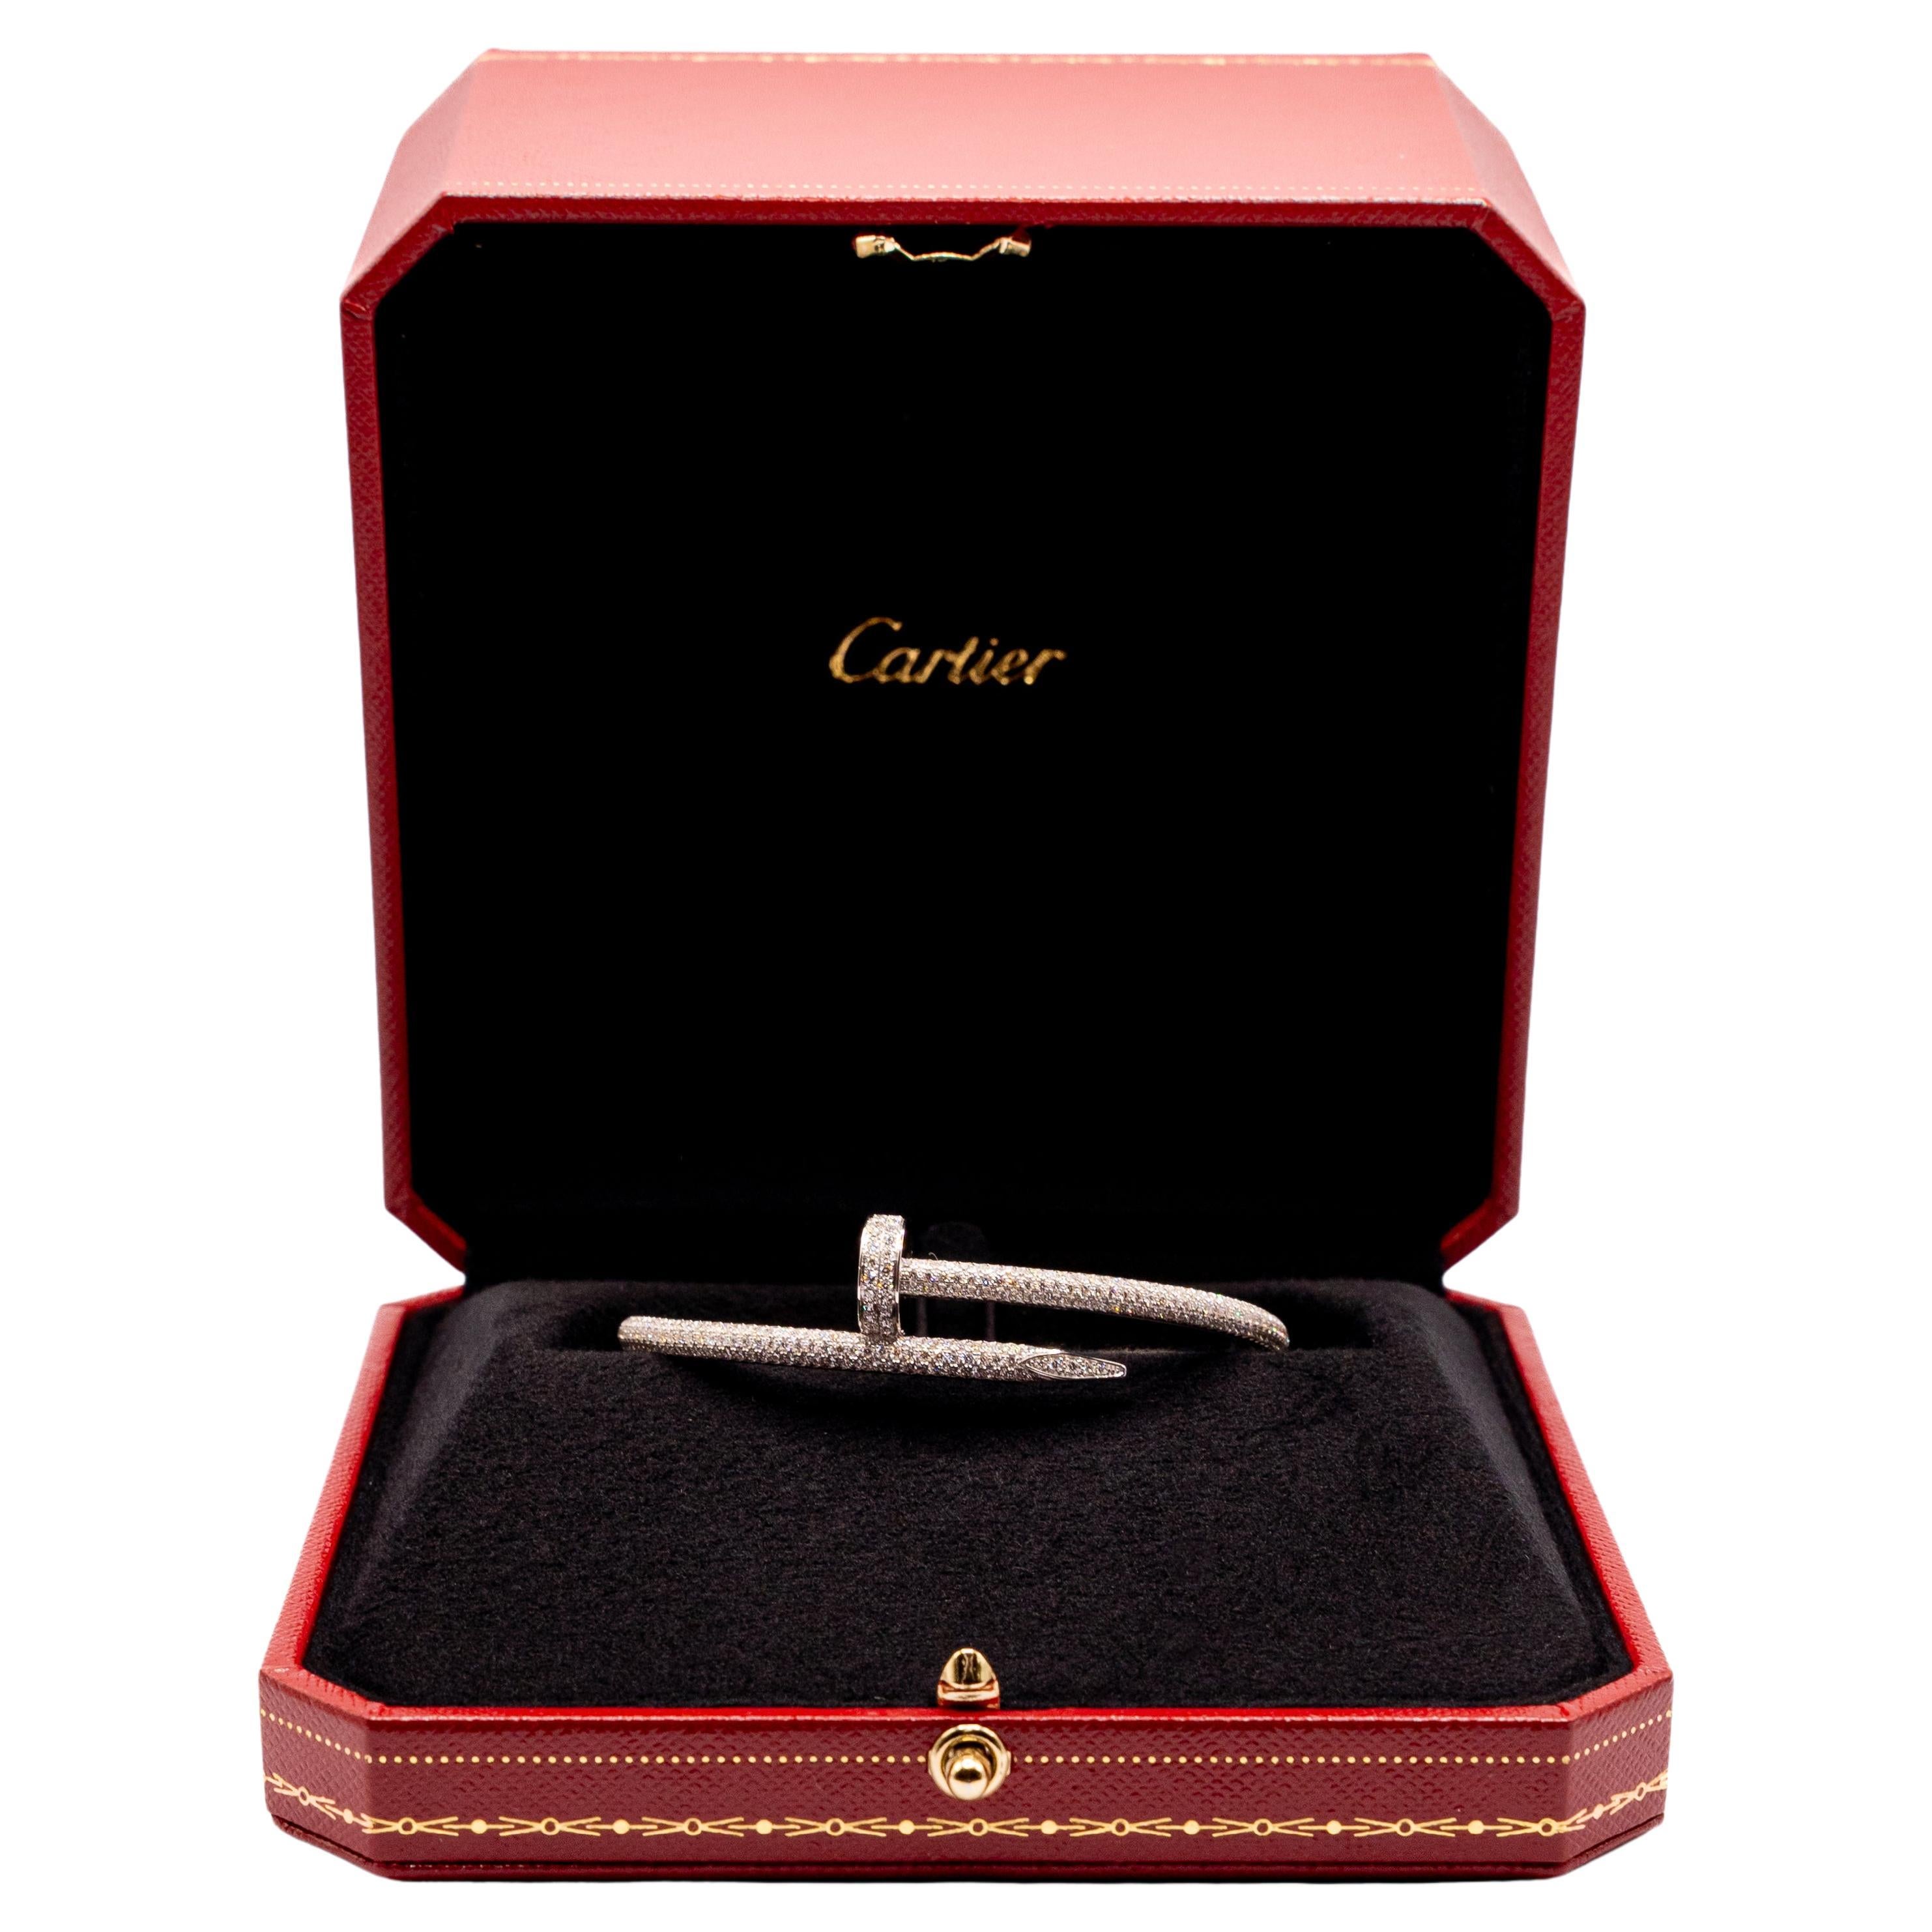 A stunning 18k white gold diamond bangle by Cartier from the Juste Un Clou collection. The bangle is of a nail design, fully pave set around the outer side with 374 round brilliant cut diamonds totalling 2.26ct. The bangle measures 3.5mm at the